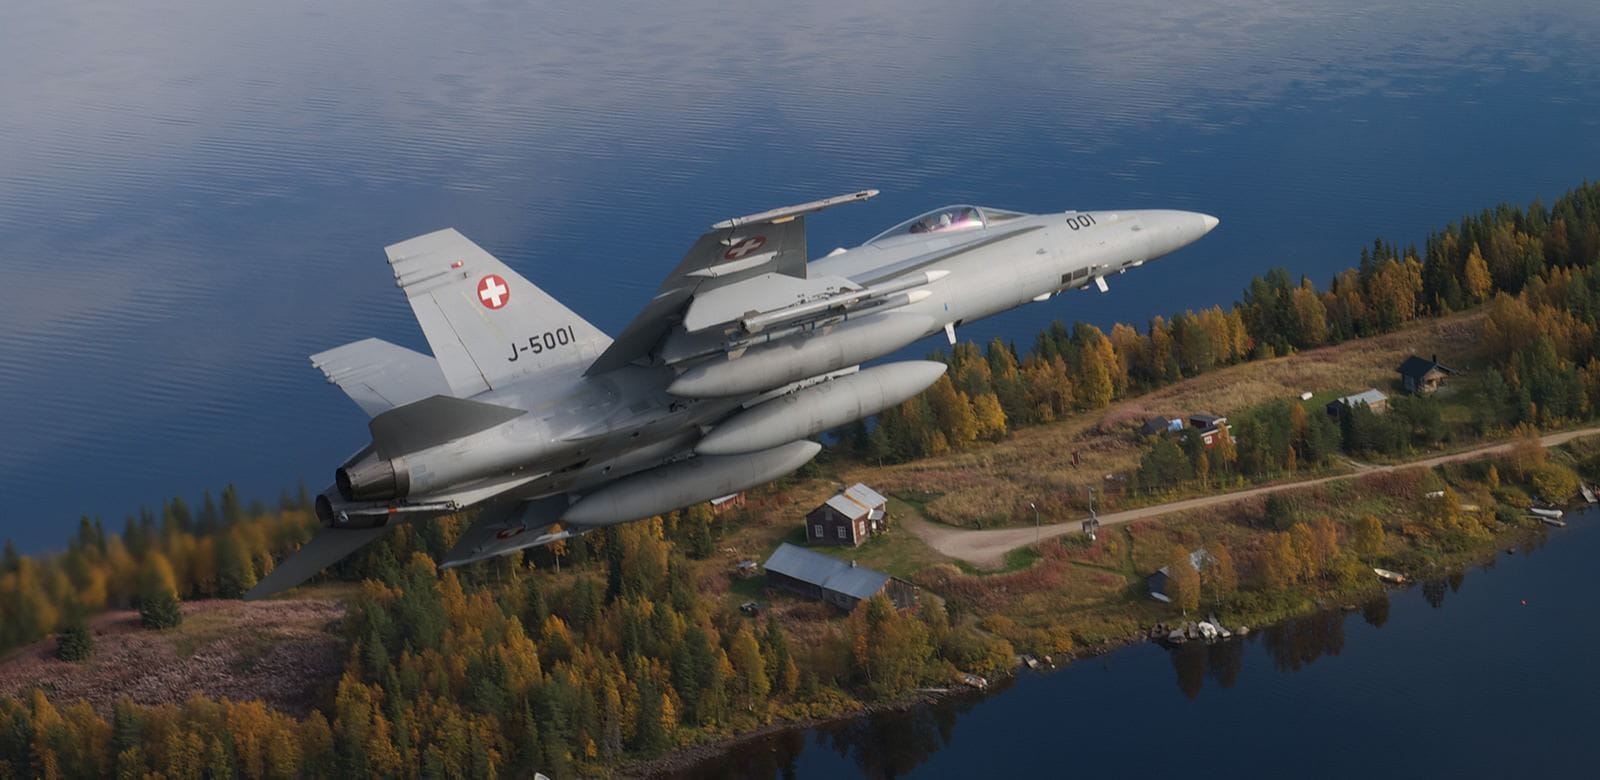 Switzerland fires an AIM-120C7 AMRAAM missile from an F-18 as part of the international Thor’s Hammer exercises at a range in Sweden.